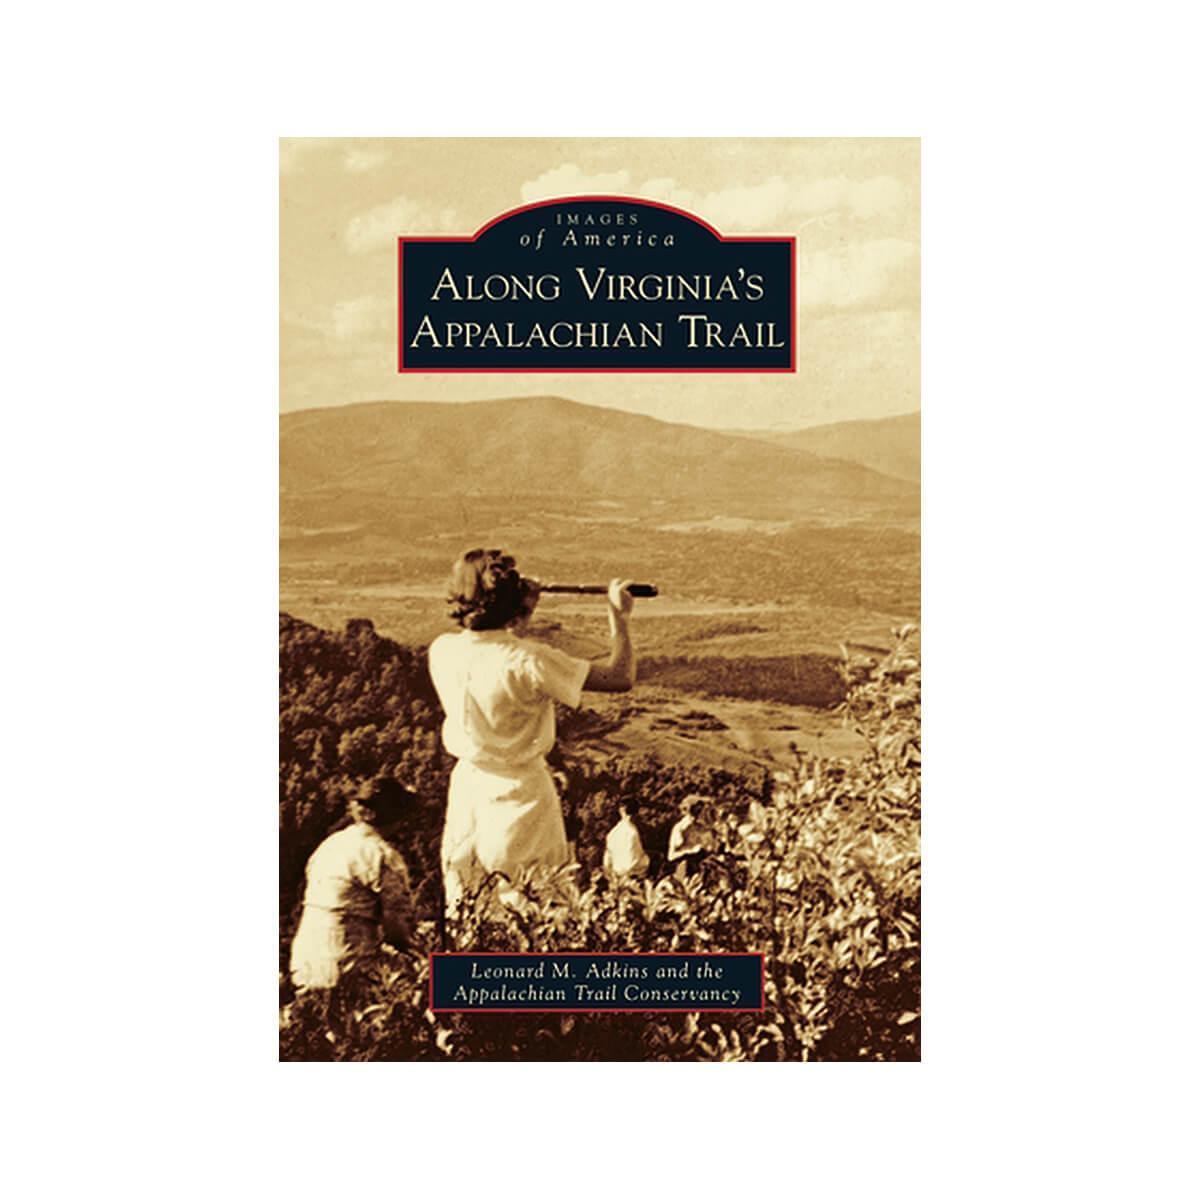  Images Of America : Along Virginia's Appalachian Trail Book